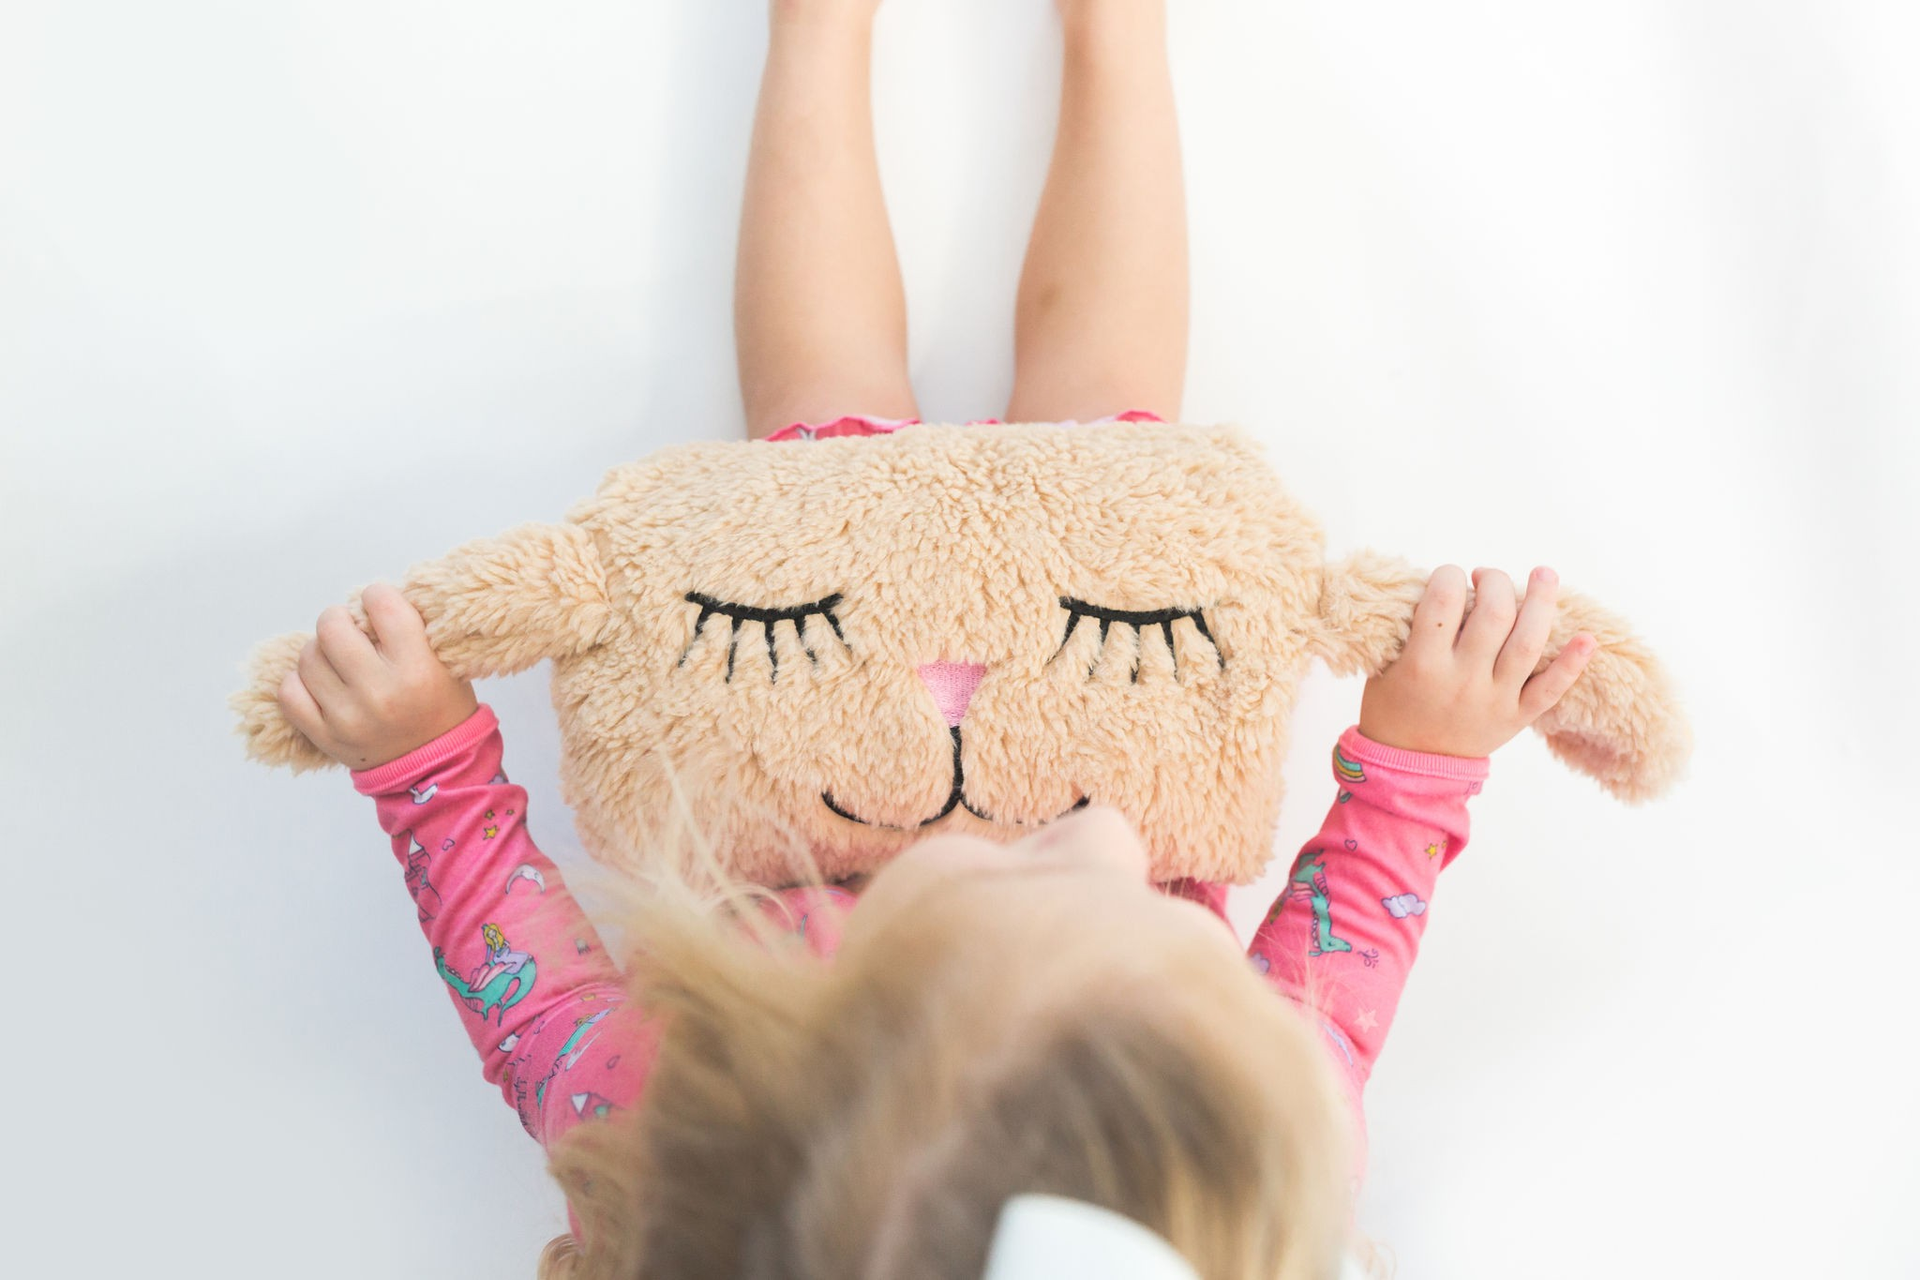 Teachers and staff get exclusive discounts on Dream Pillow products for kids.